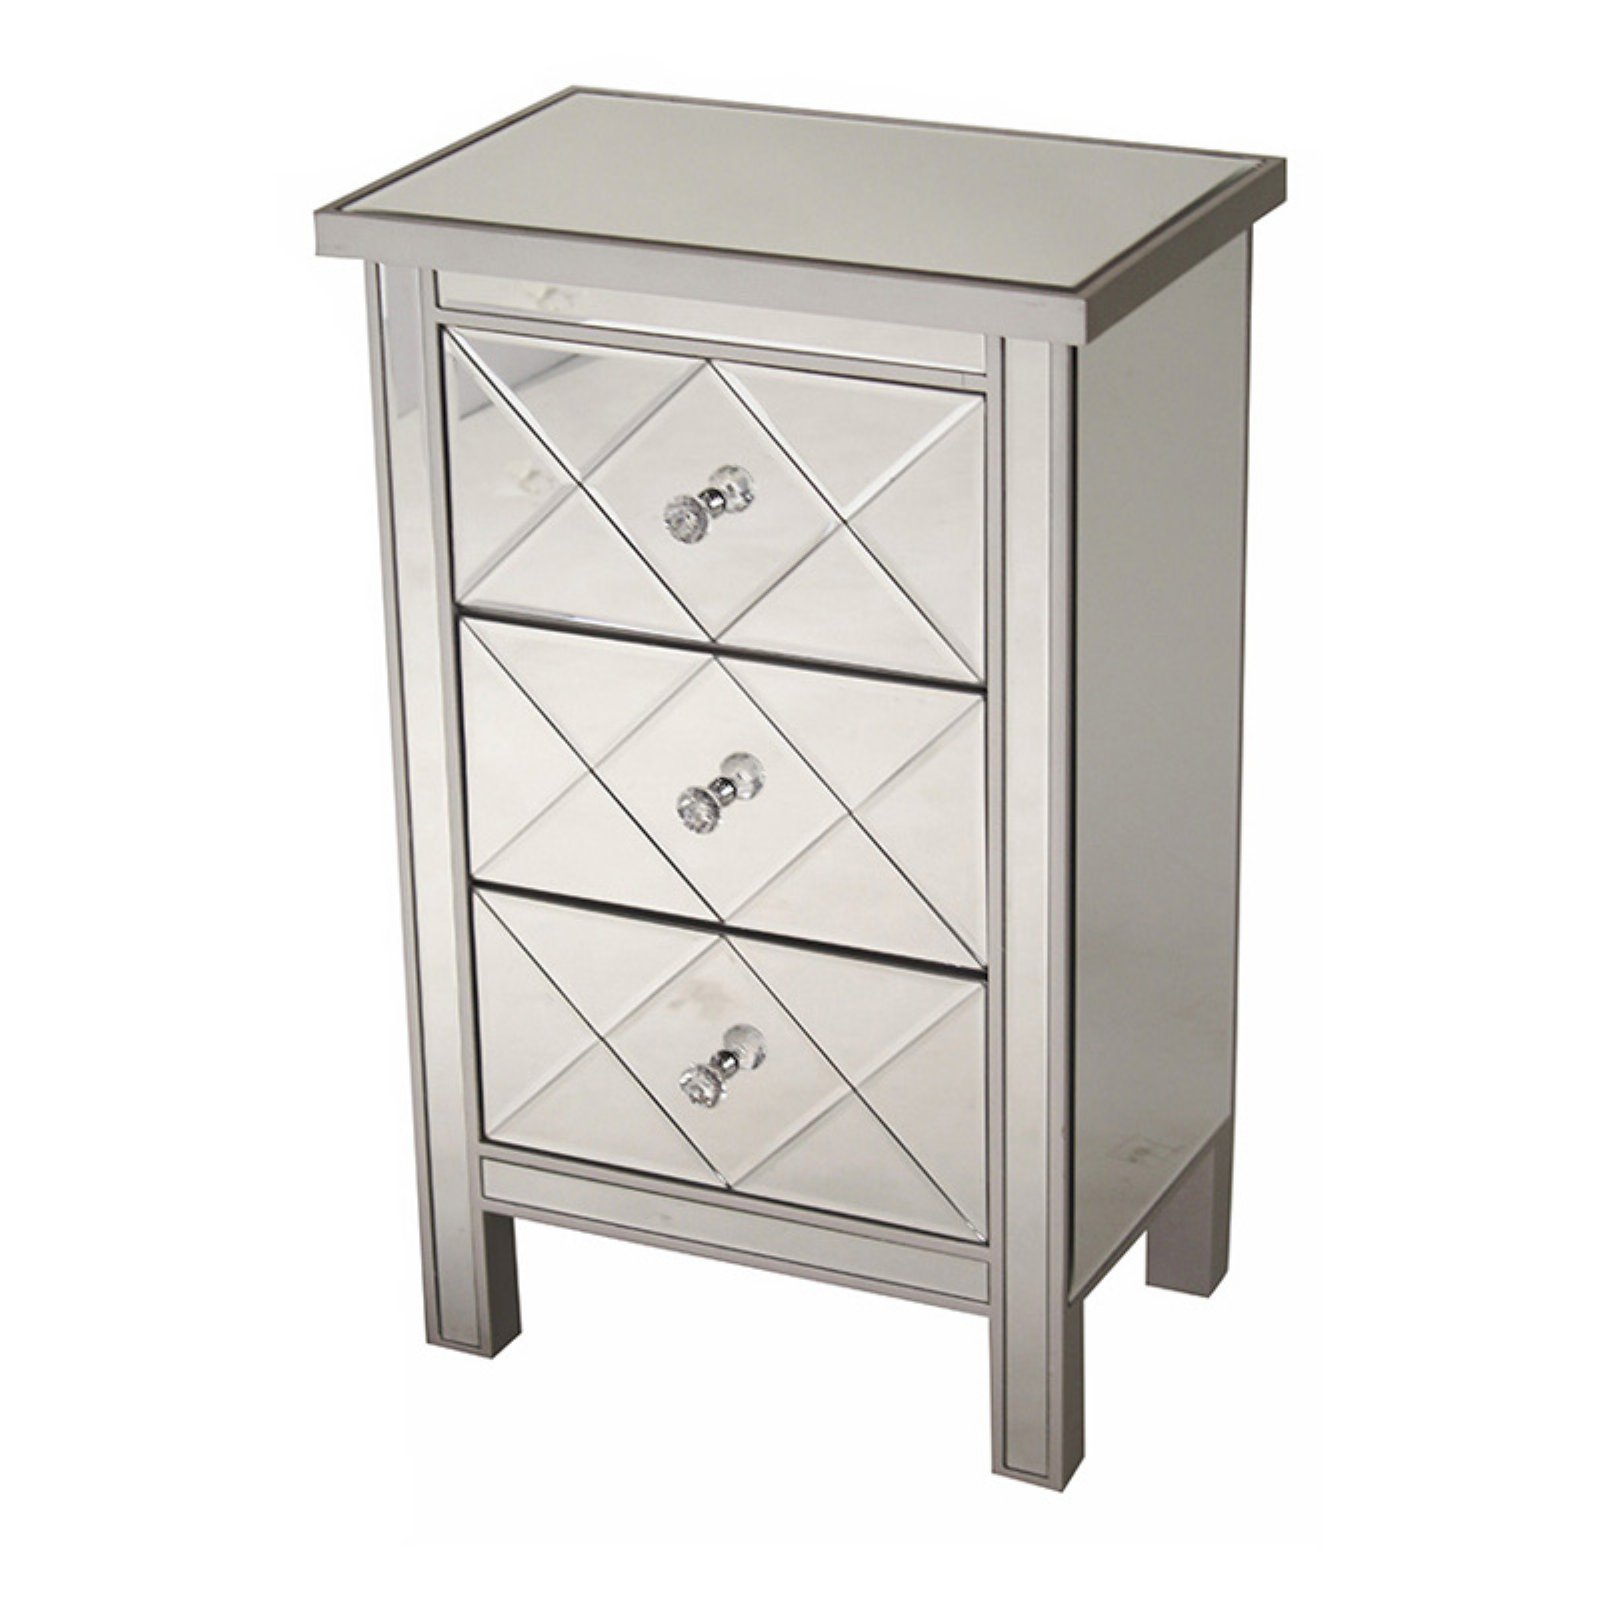 Heather Ann Creations Emmy 3 Drawer Mirrored Accent Cabinet - image 2 of 7